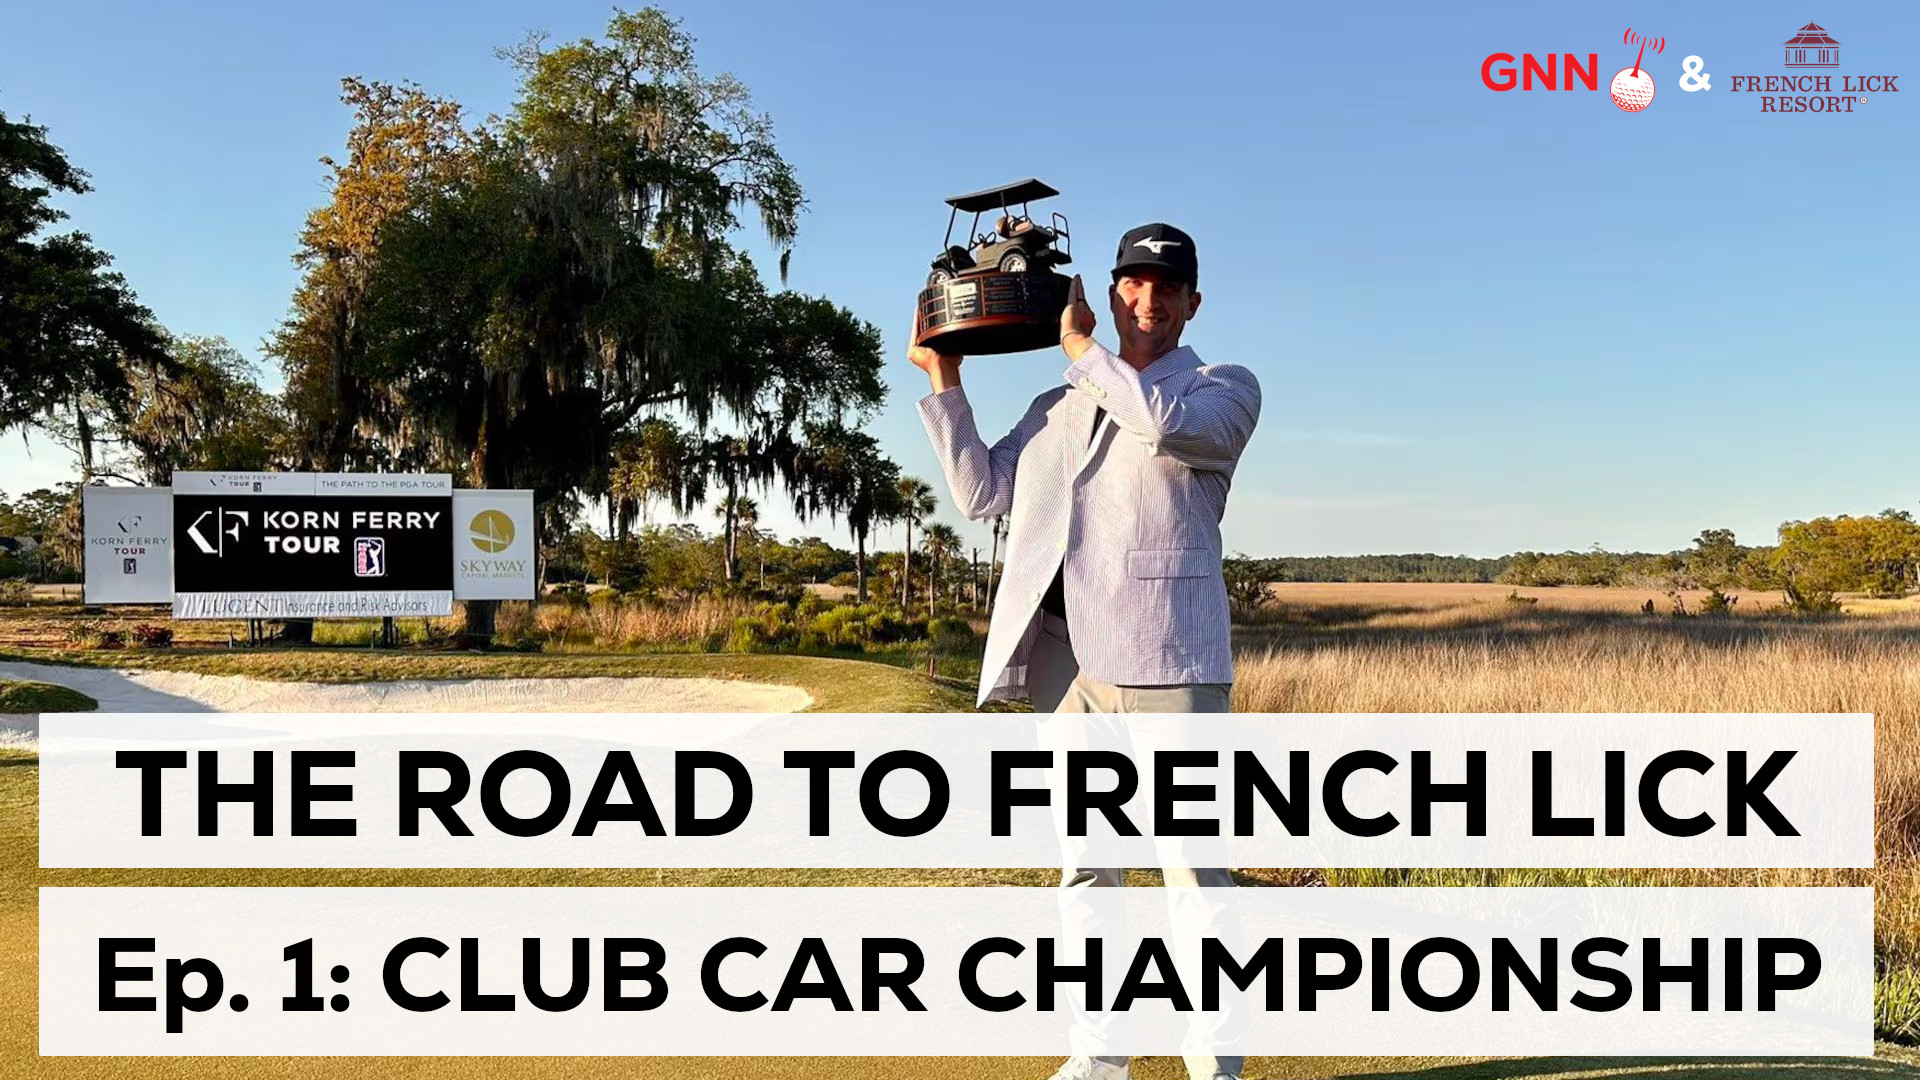 The Road to French Lick (Ep. 1): Club Car Championship